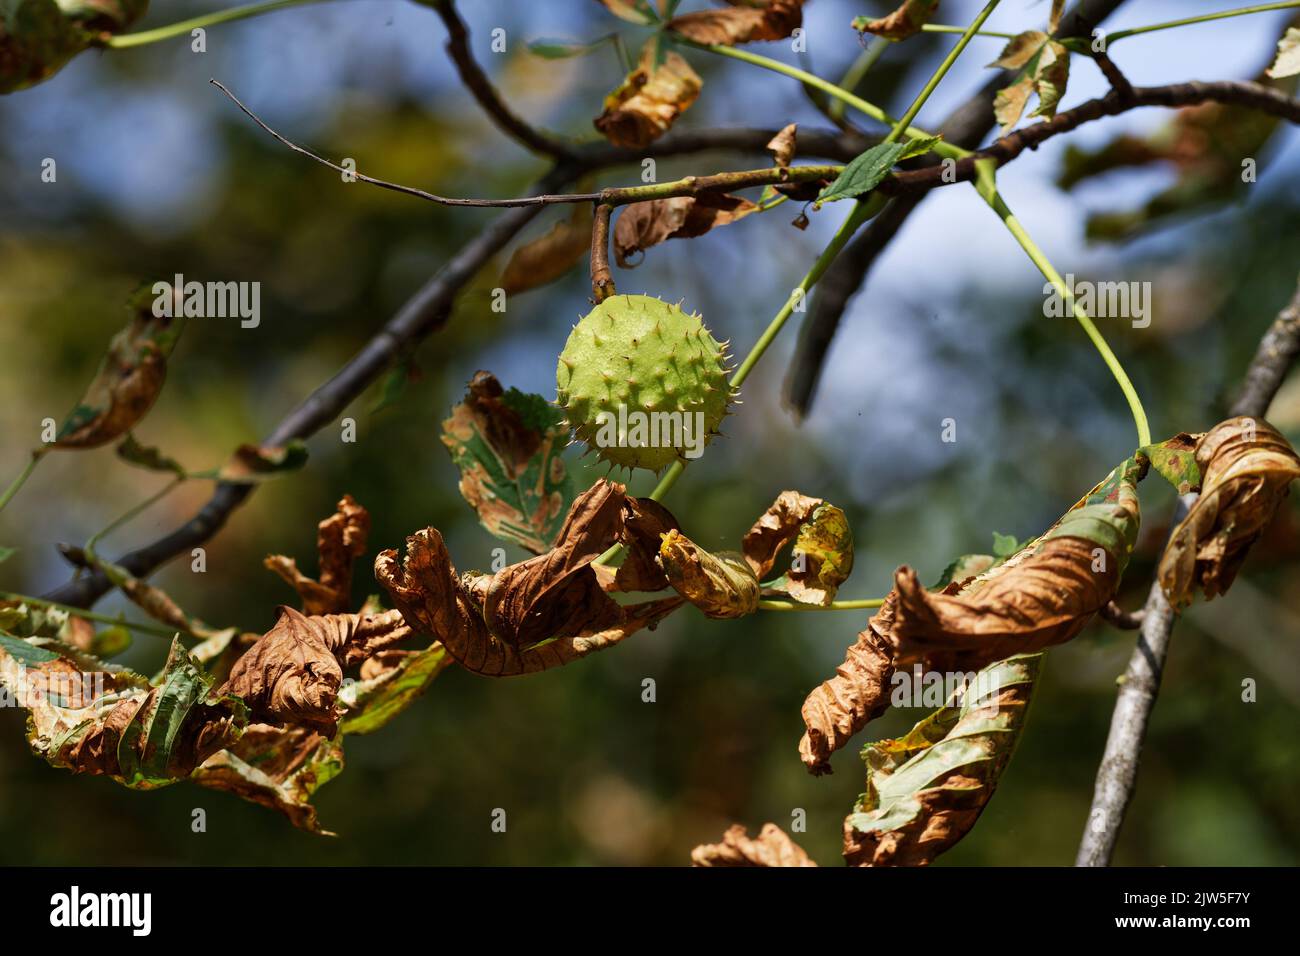 a ripe chestnut fruit hangs on a tree with leaves dried up by the summer heat Stock Photo